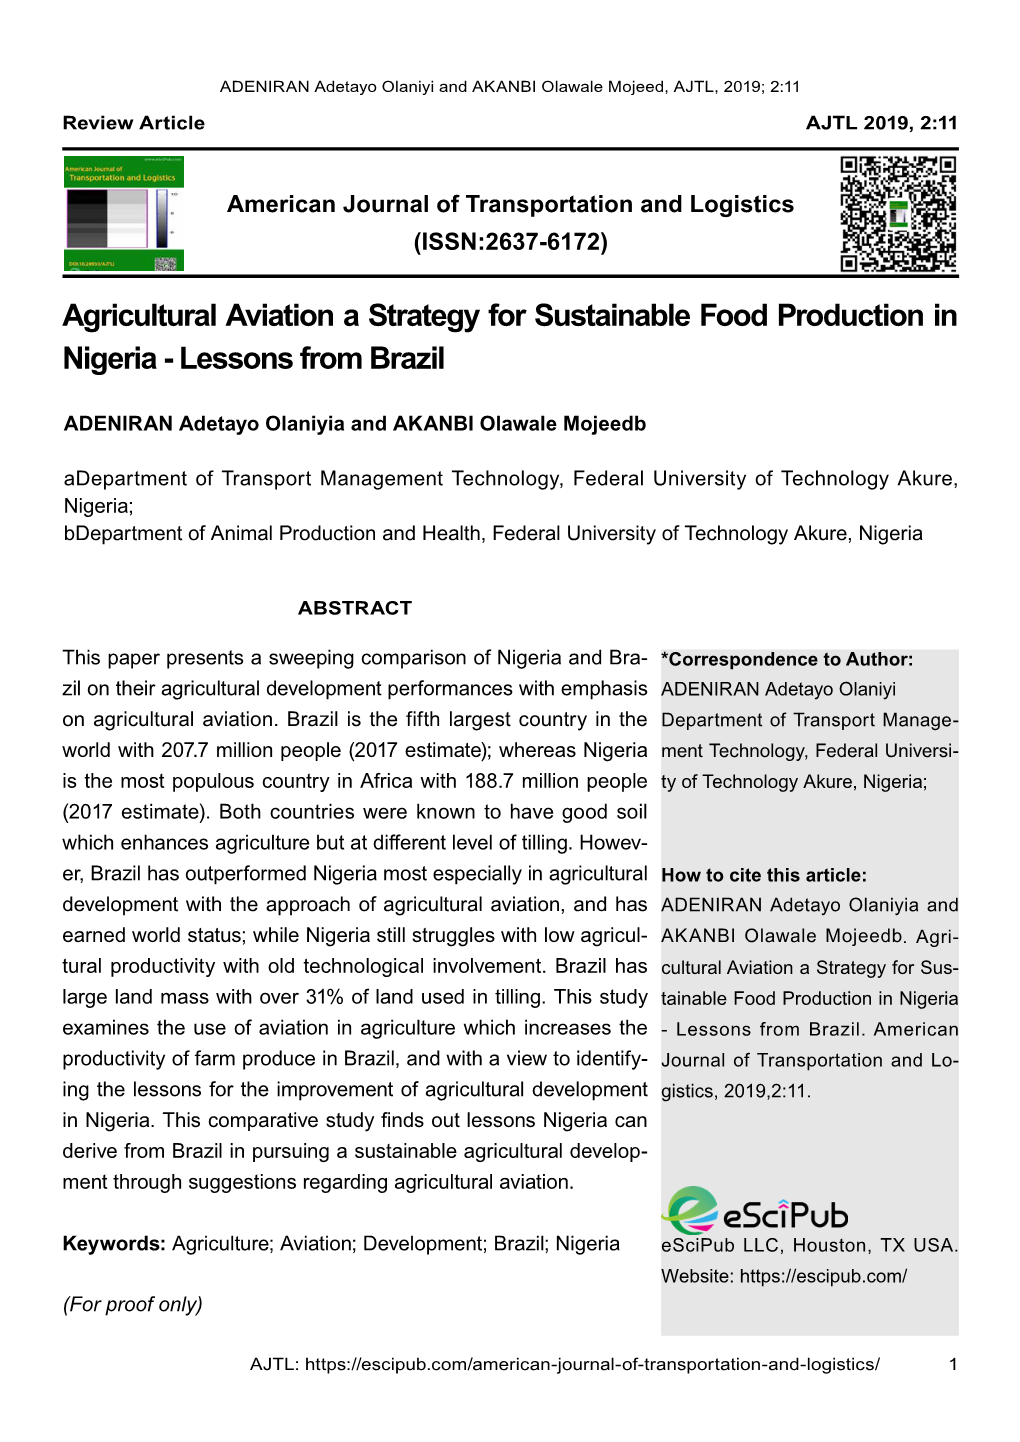 Agricultural Aviation a Strategy for Sustainable Food Production in Nigeria - Lessons from Brazil